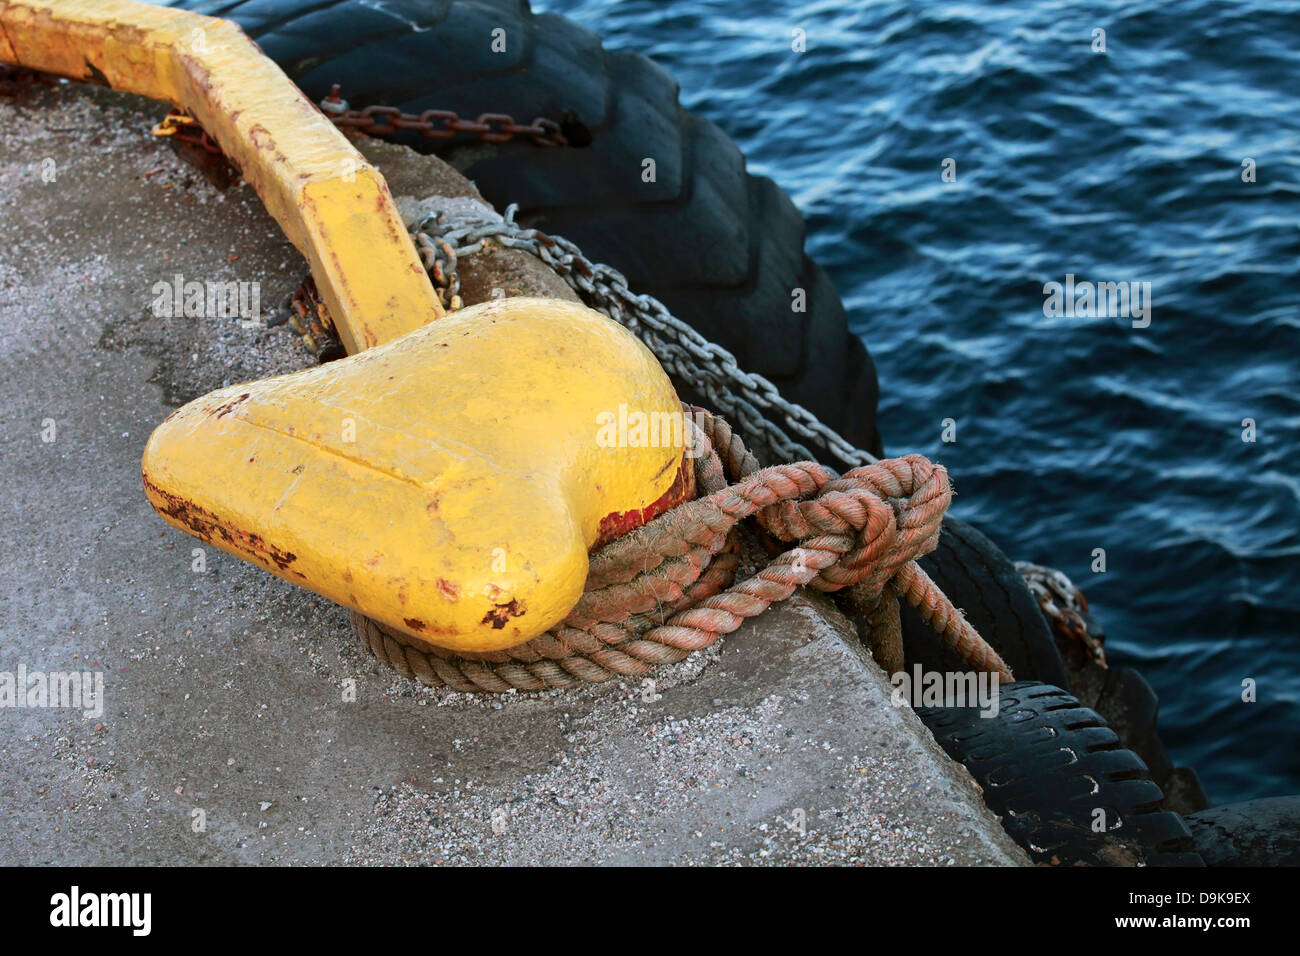 Yellow mooring bollard with blue naval rope and chain on the pier Stock Photo